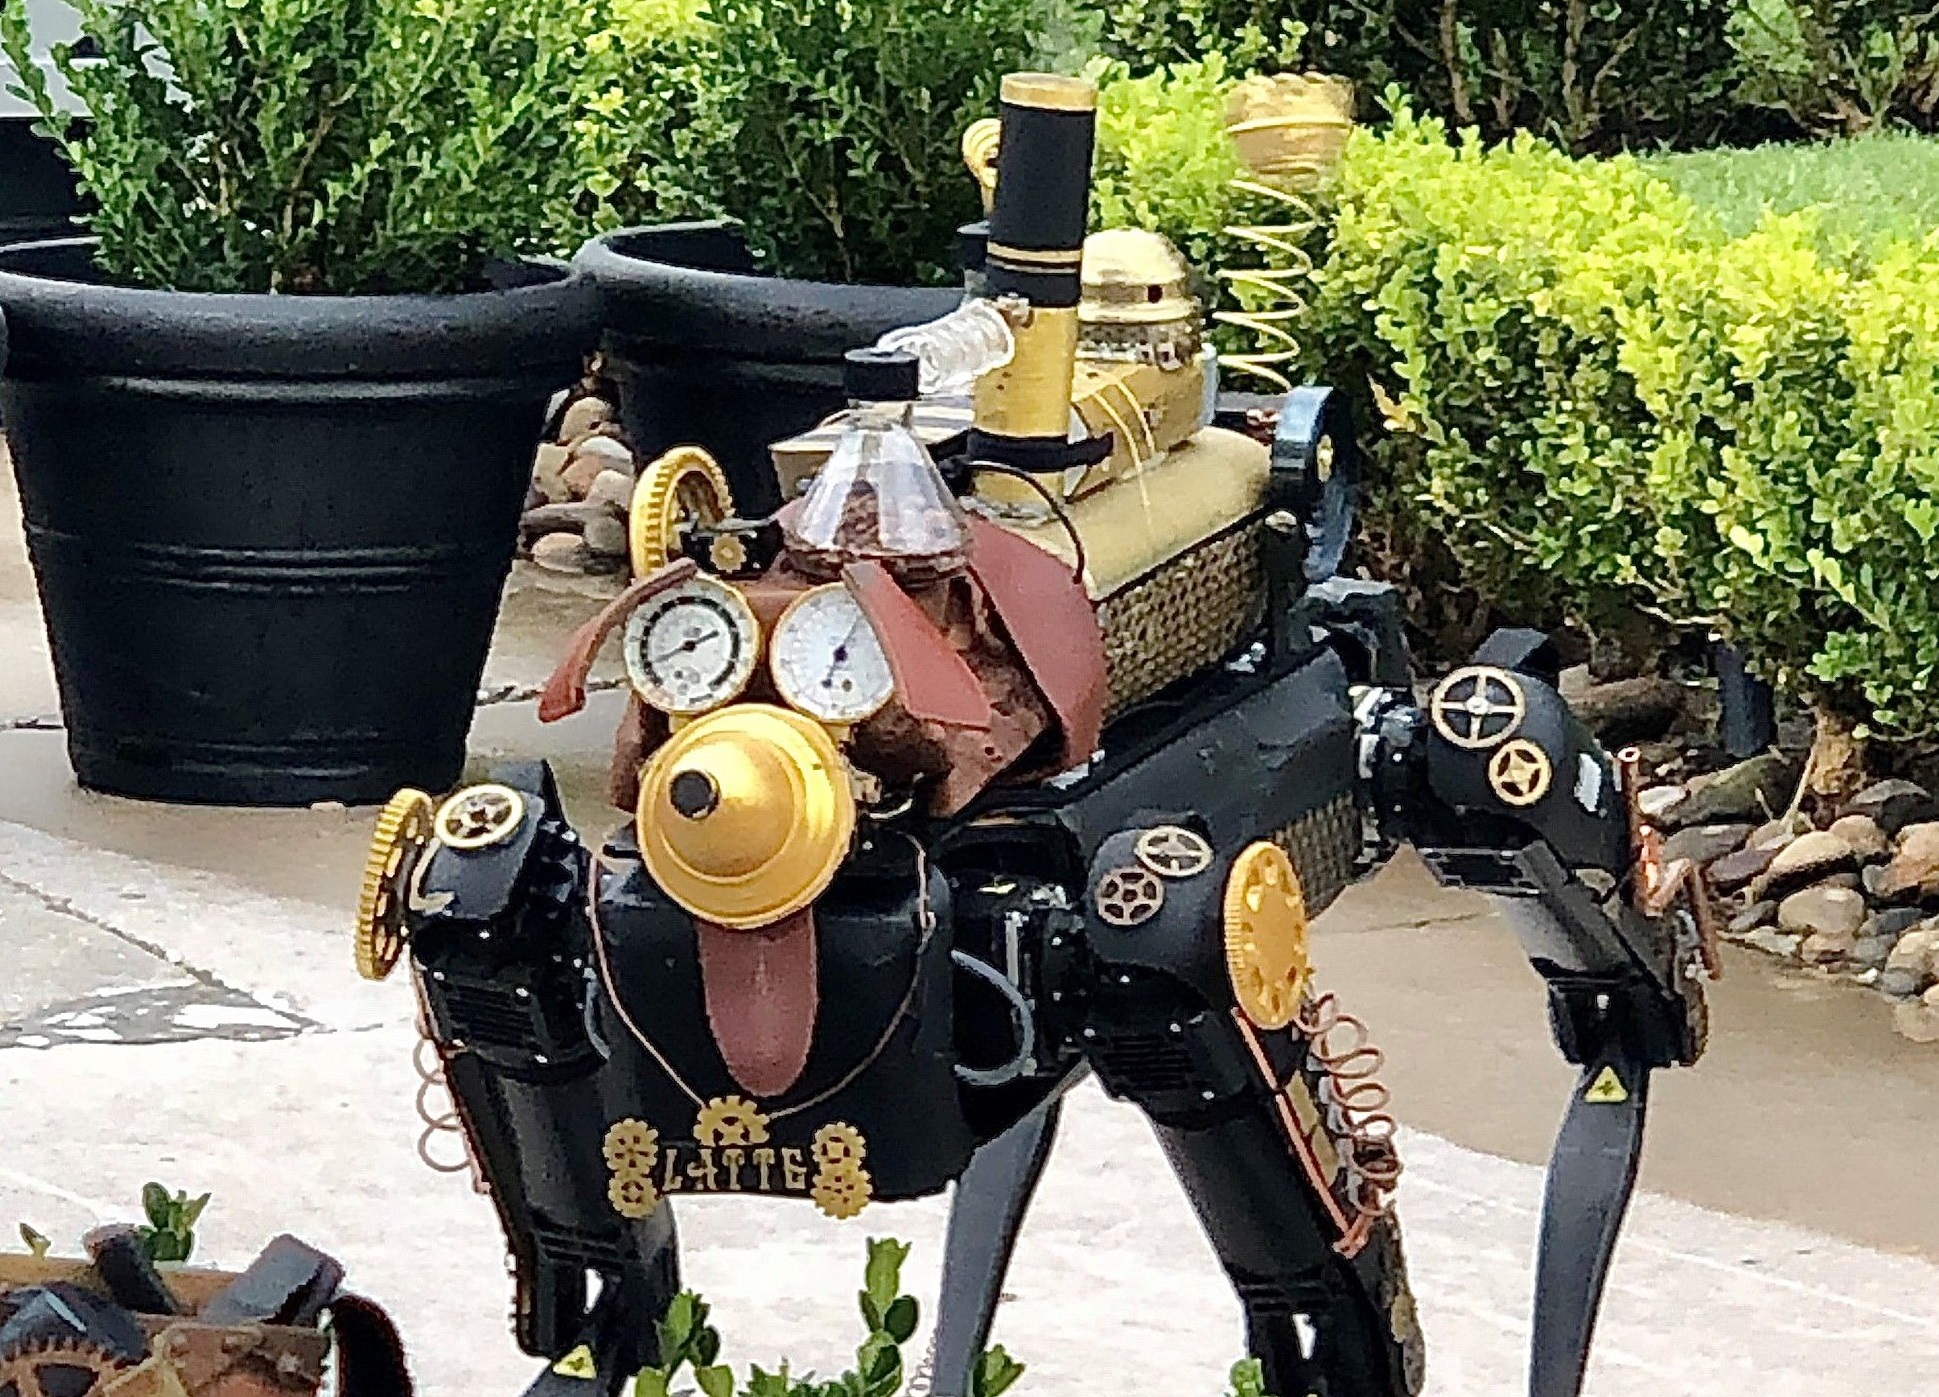 Latte – a dynamic Spot robot joins Penelope and Jacques for a first-of-its-kind interactive character appearance utilizing the innovative Spot robot technology developed by Boston Dynamics.